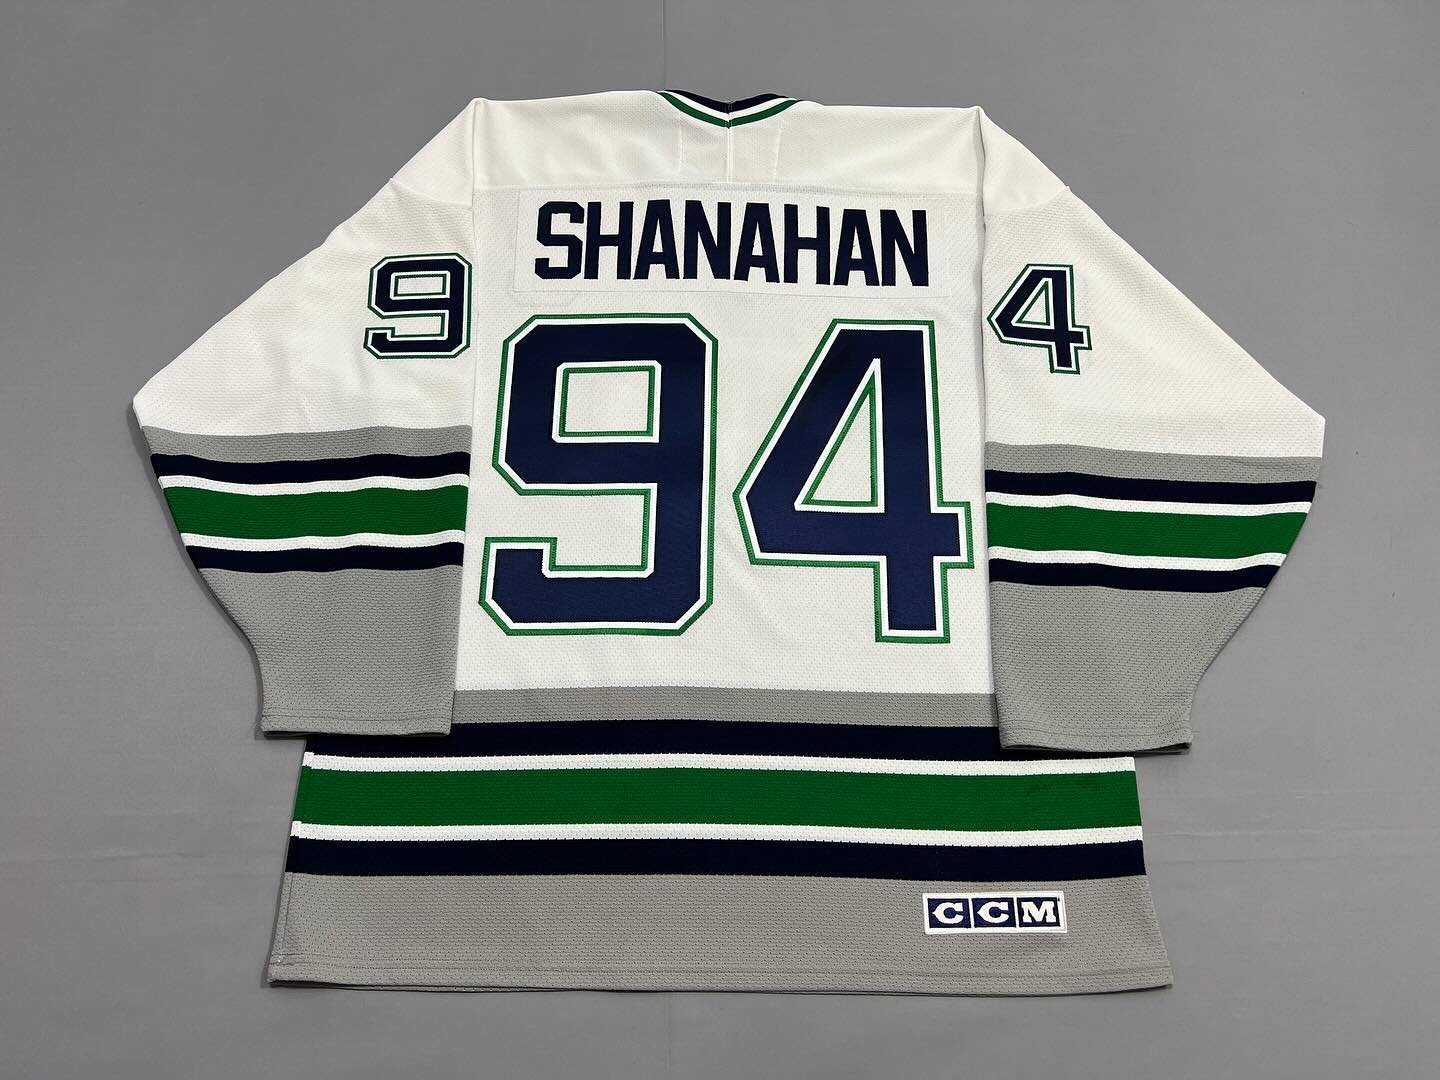 Figured I&rsquo;d post some recent customer work, it&rsquo;s been a while! Been super busy, closing in on nearly 350 jerseys for the year! 

#whalers #hurricanes #causechaos #takewarning #carolina #hartford #philly #philadelphia #flyers #newjersey #j